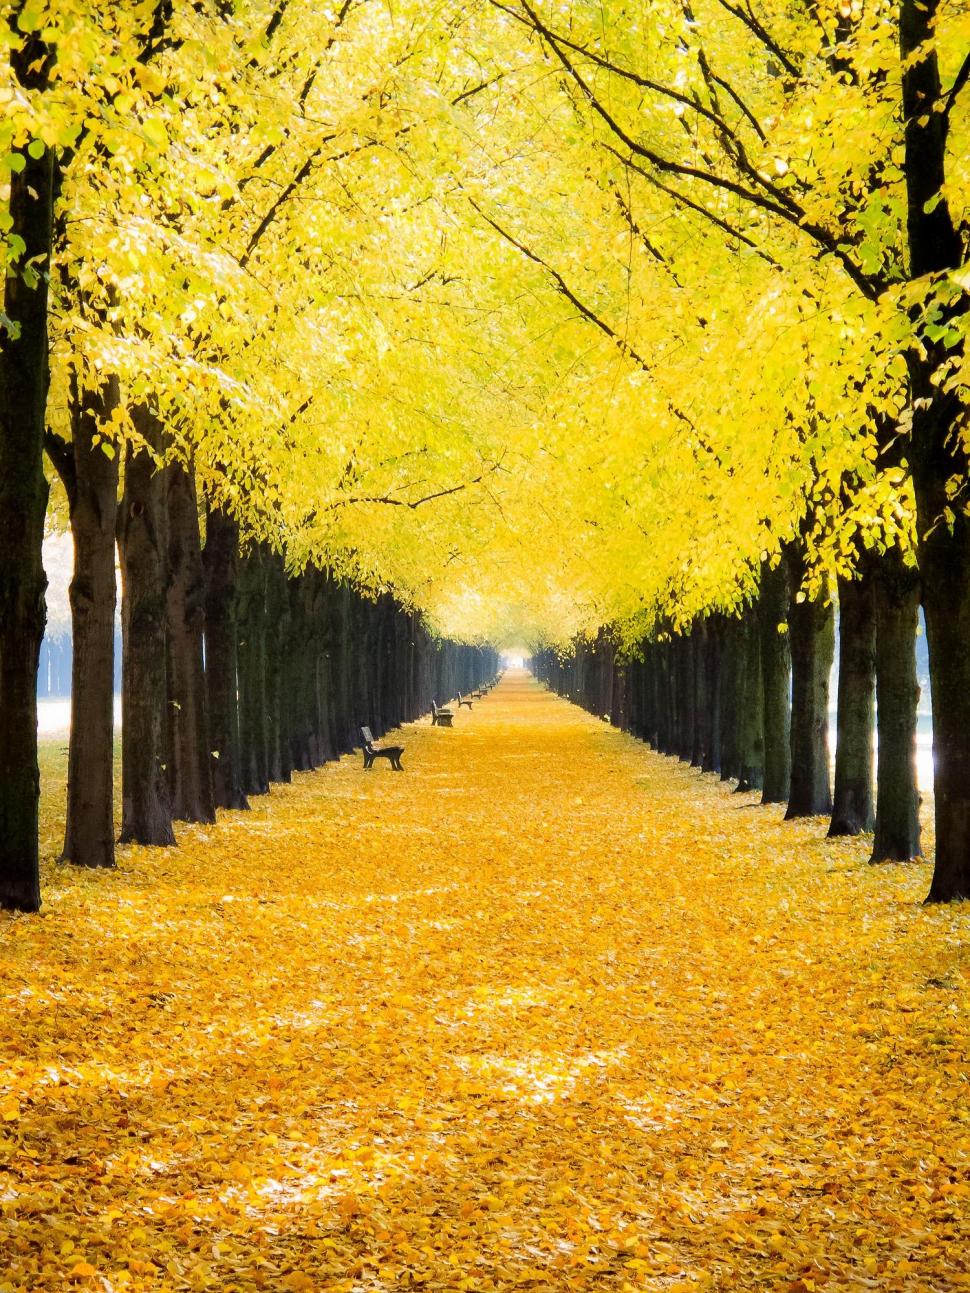 Trees, Nature, Path, Yellow Leaves, Benches wallpaper,trees wallpaper,nature wallpaper,path wallpaper,yellow leaves wallpaper,benches wallpaper,1500x2000 wallpaper